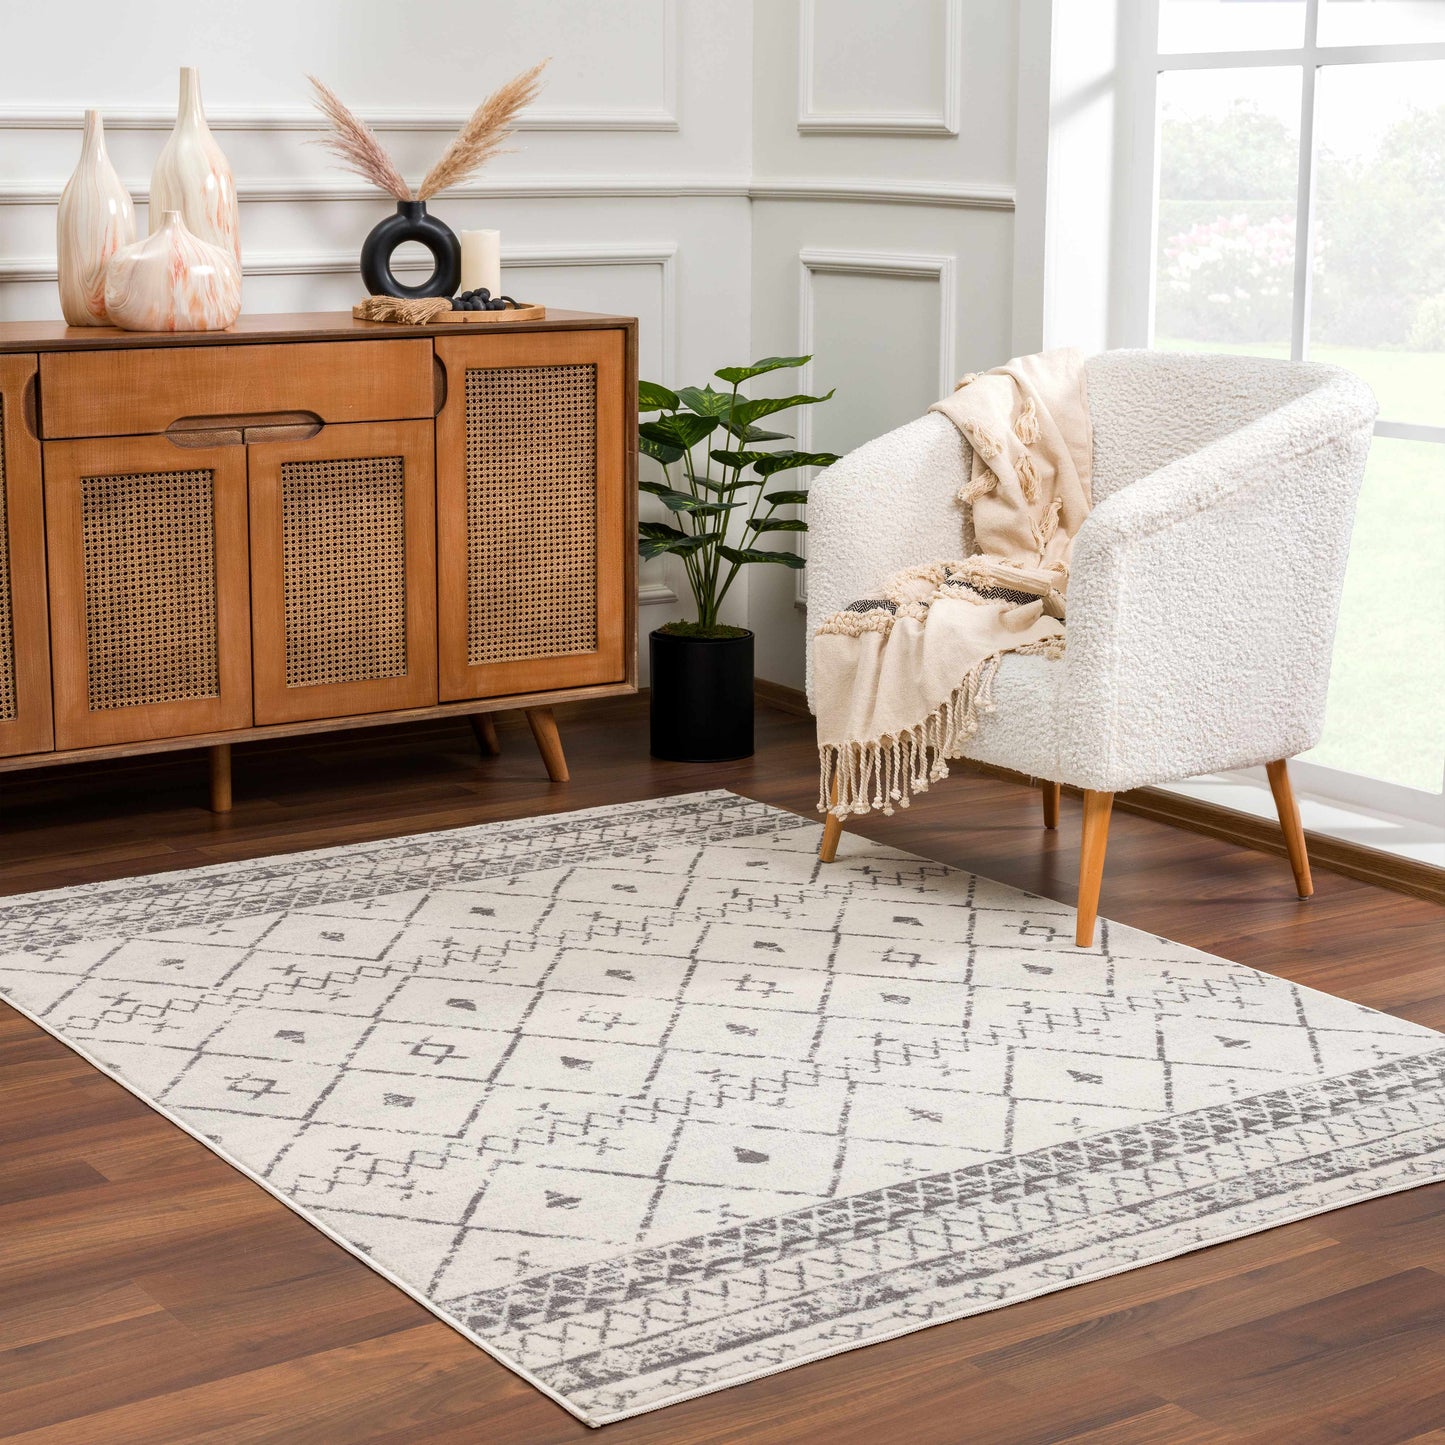 Boutique Rugs Rugs 11'10" x 15' Rectangle Newville Area Rug